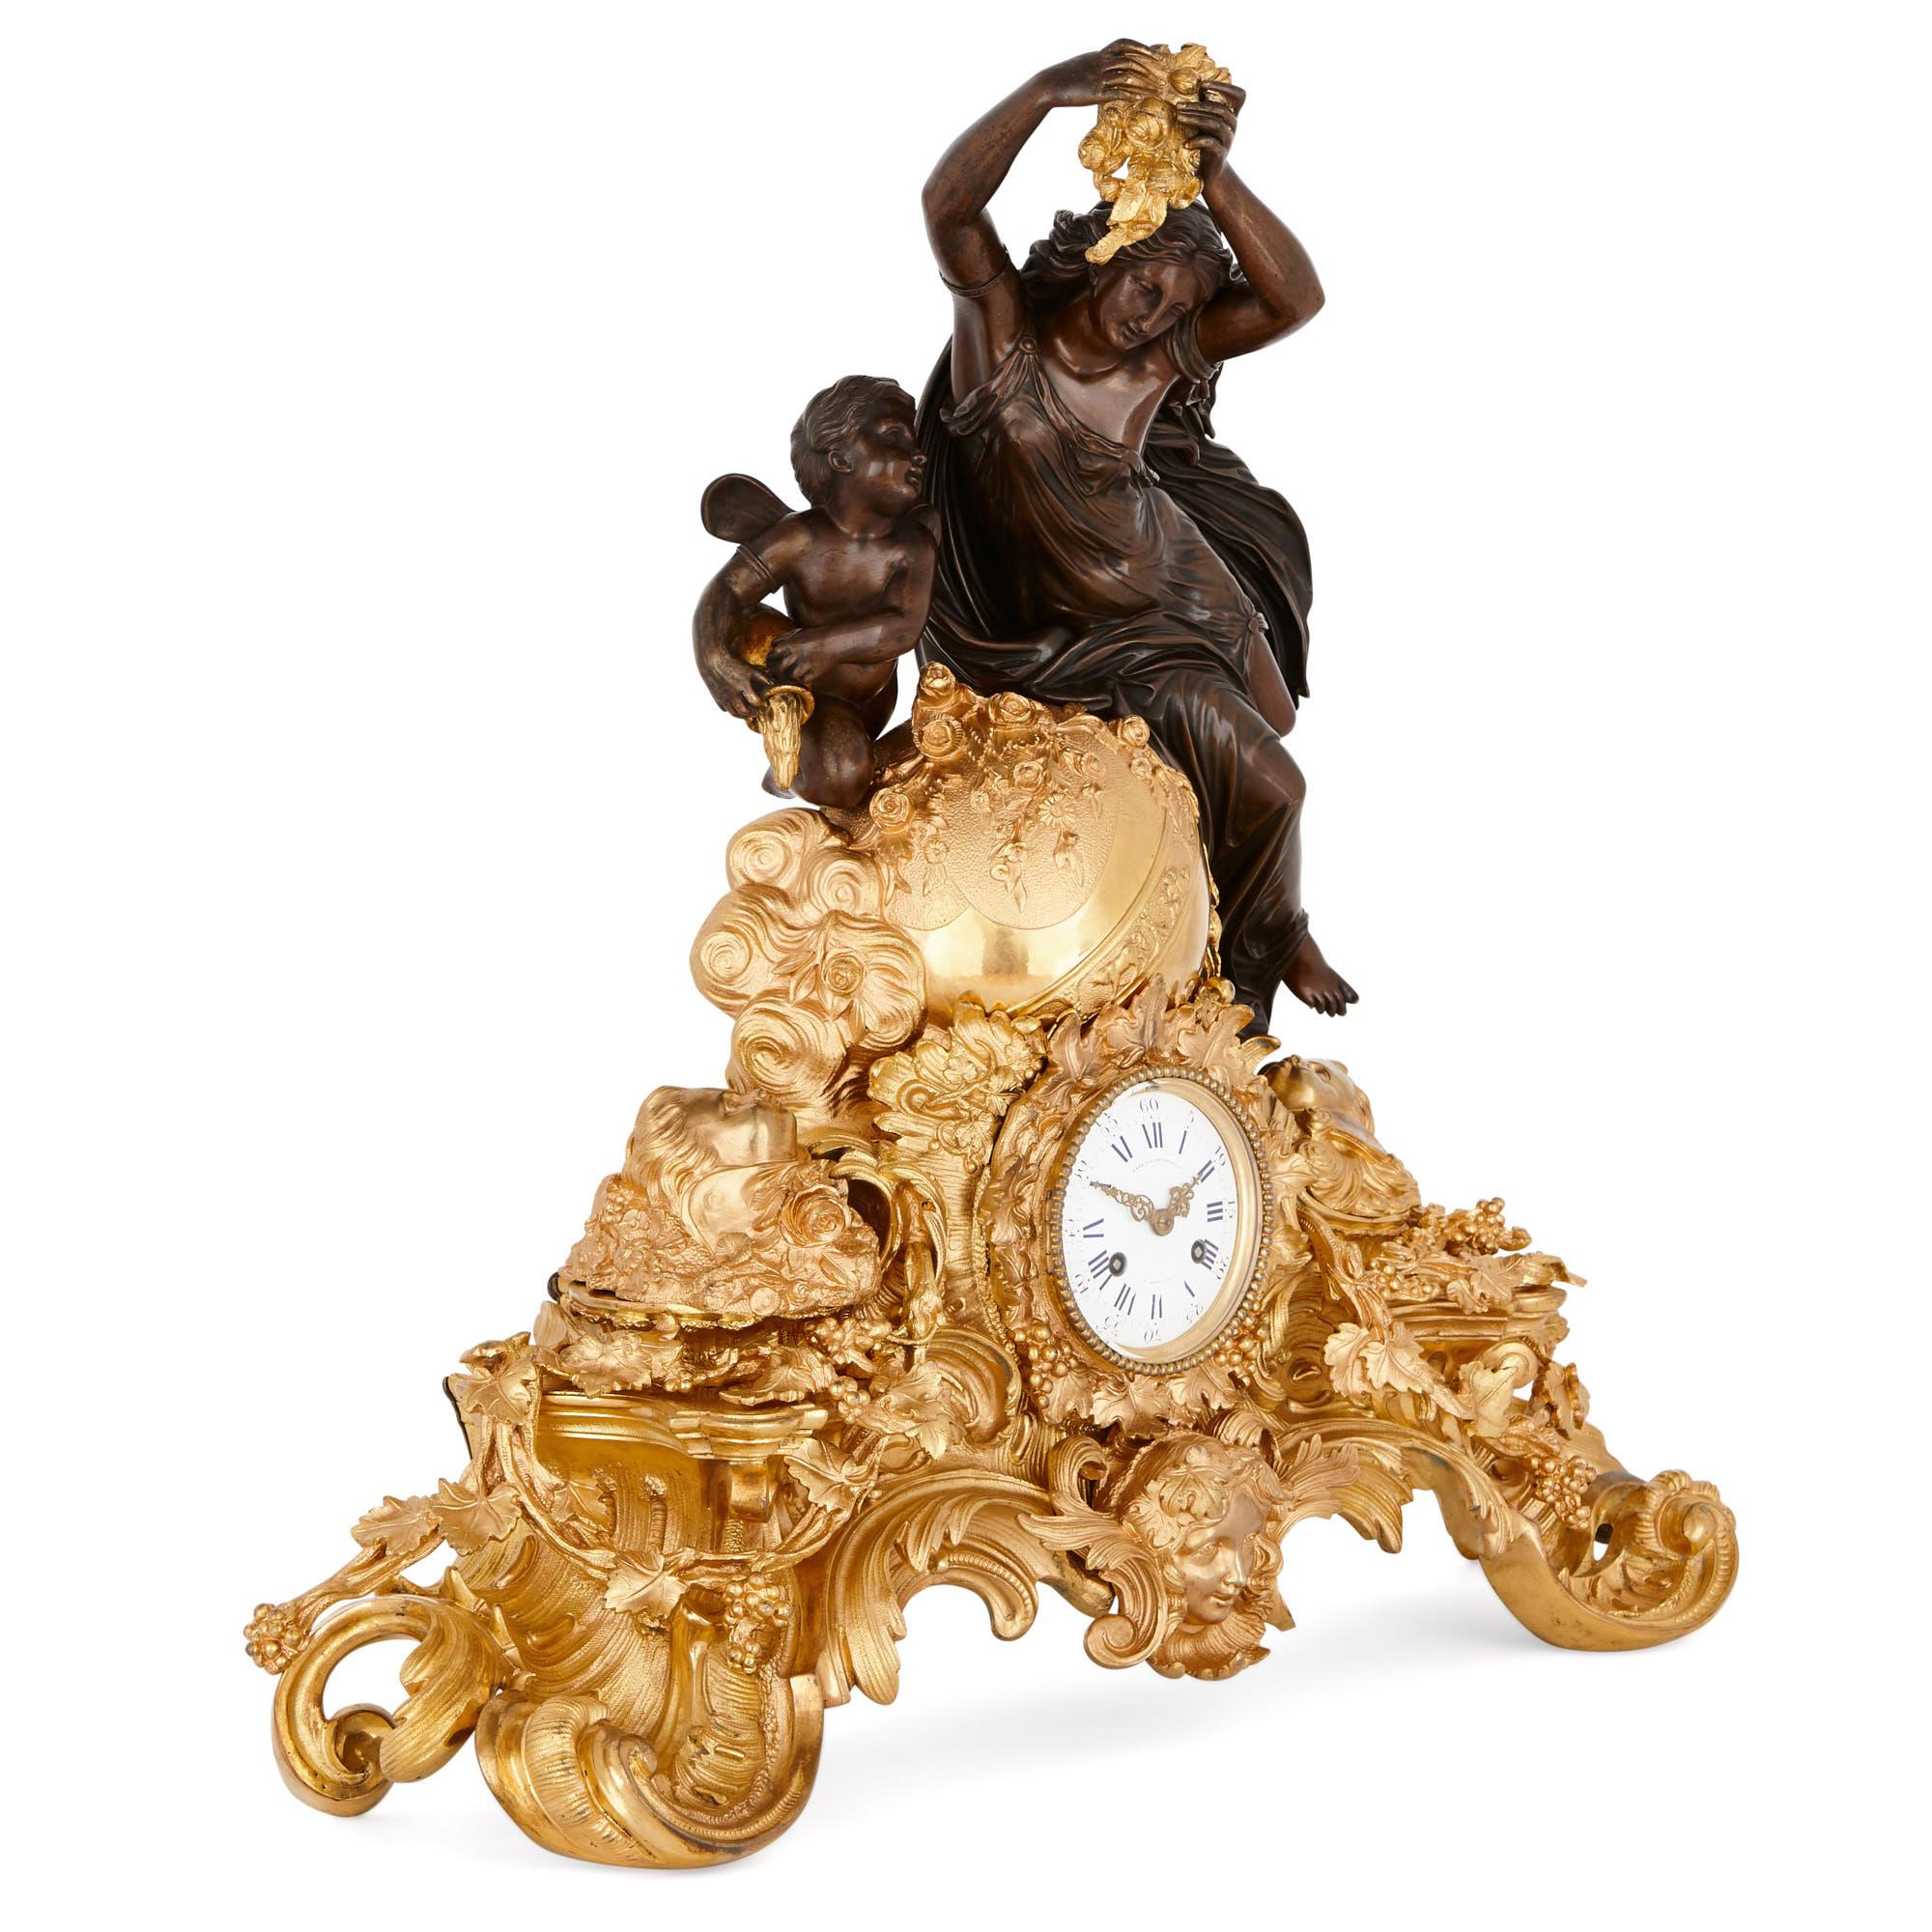 This opulent late-19th century mantel clock—with its profusion of C-scrolls and stylised foliage, as well as classical masks and dynamic sculptural figures—is clearly inspired by the luxury arts of the Louis XV period (1715-1174) in France. 

The